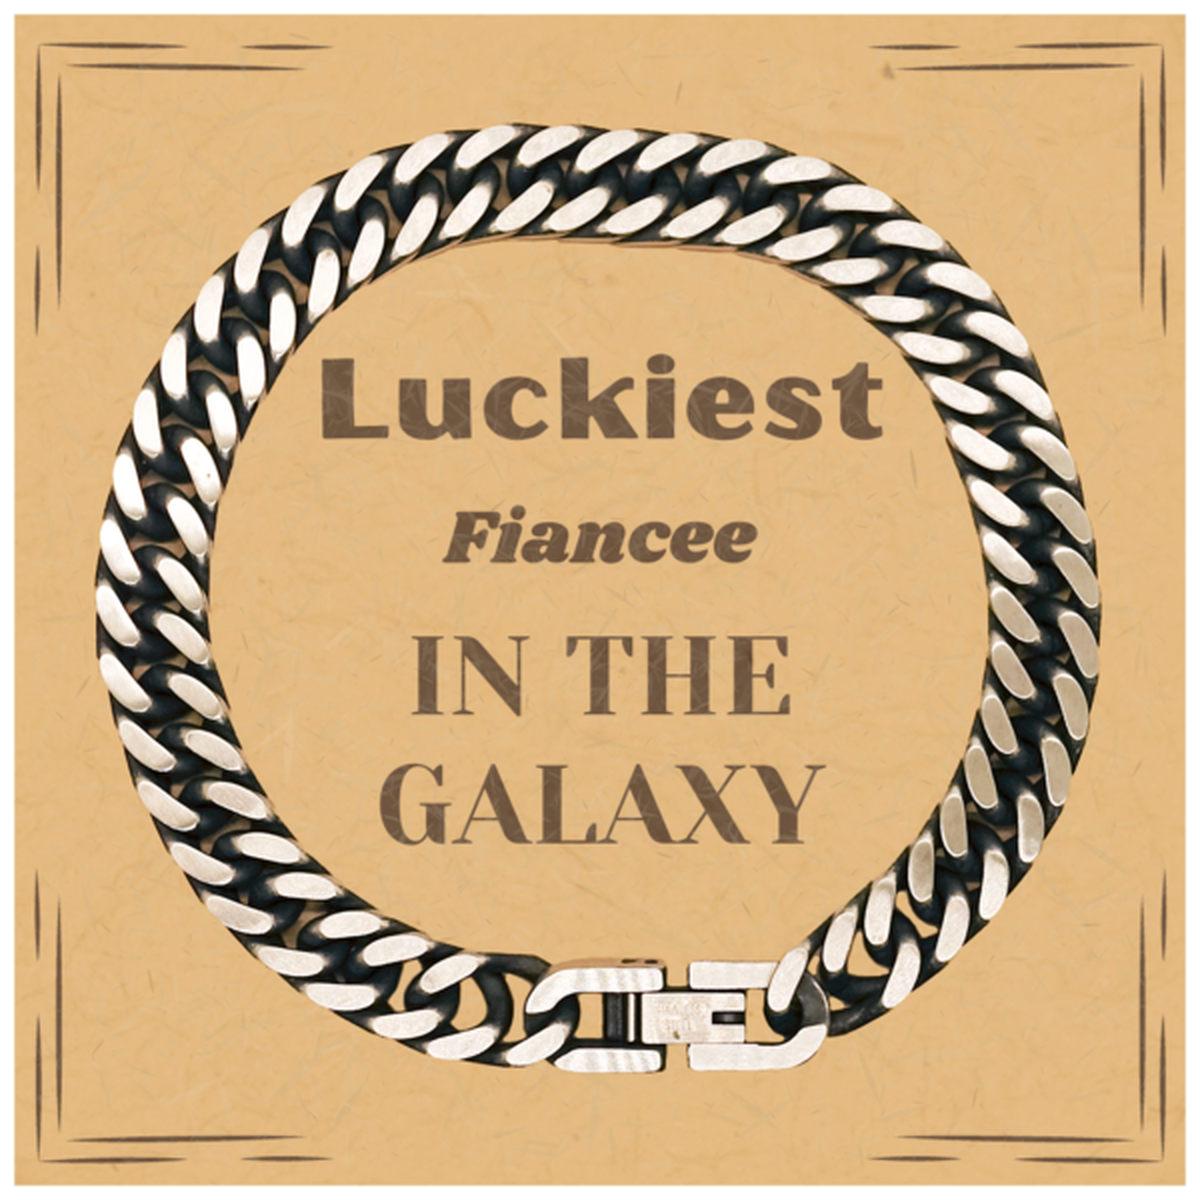 Luckiest Fiancee in the Galaxy, To My Fiancee Message Card Gifts, Christmas Fiancee Cuban Link Chain Bracelet Gifts, X-mas Birthday Unique Gifts For Fiancee Men Women